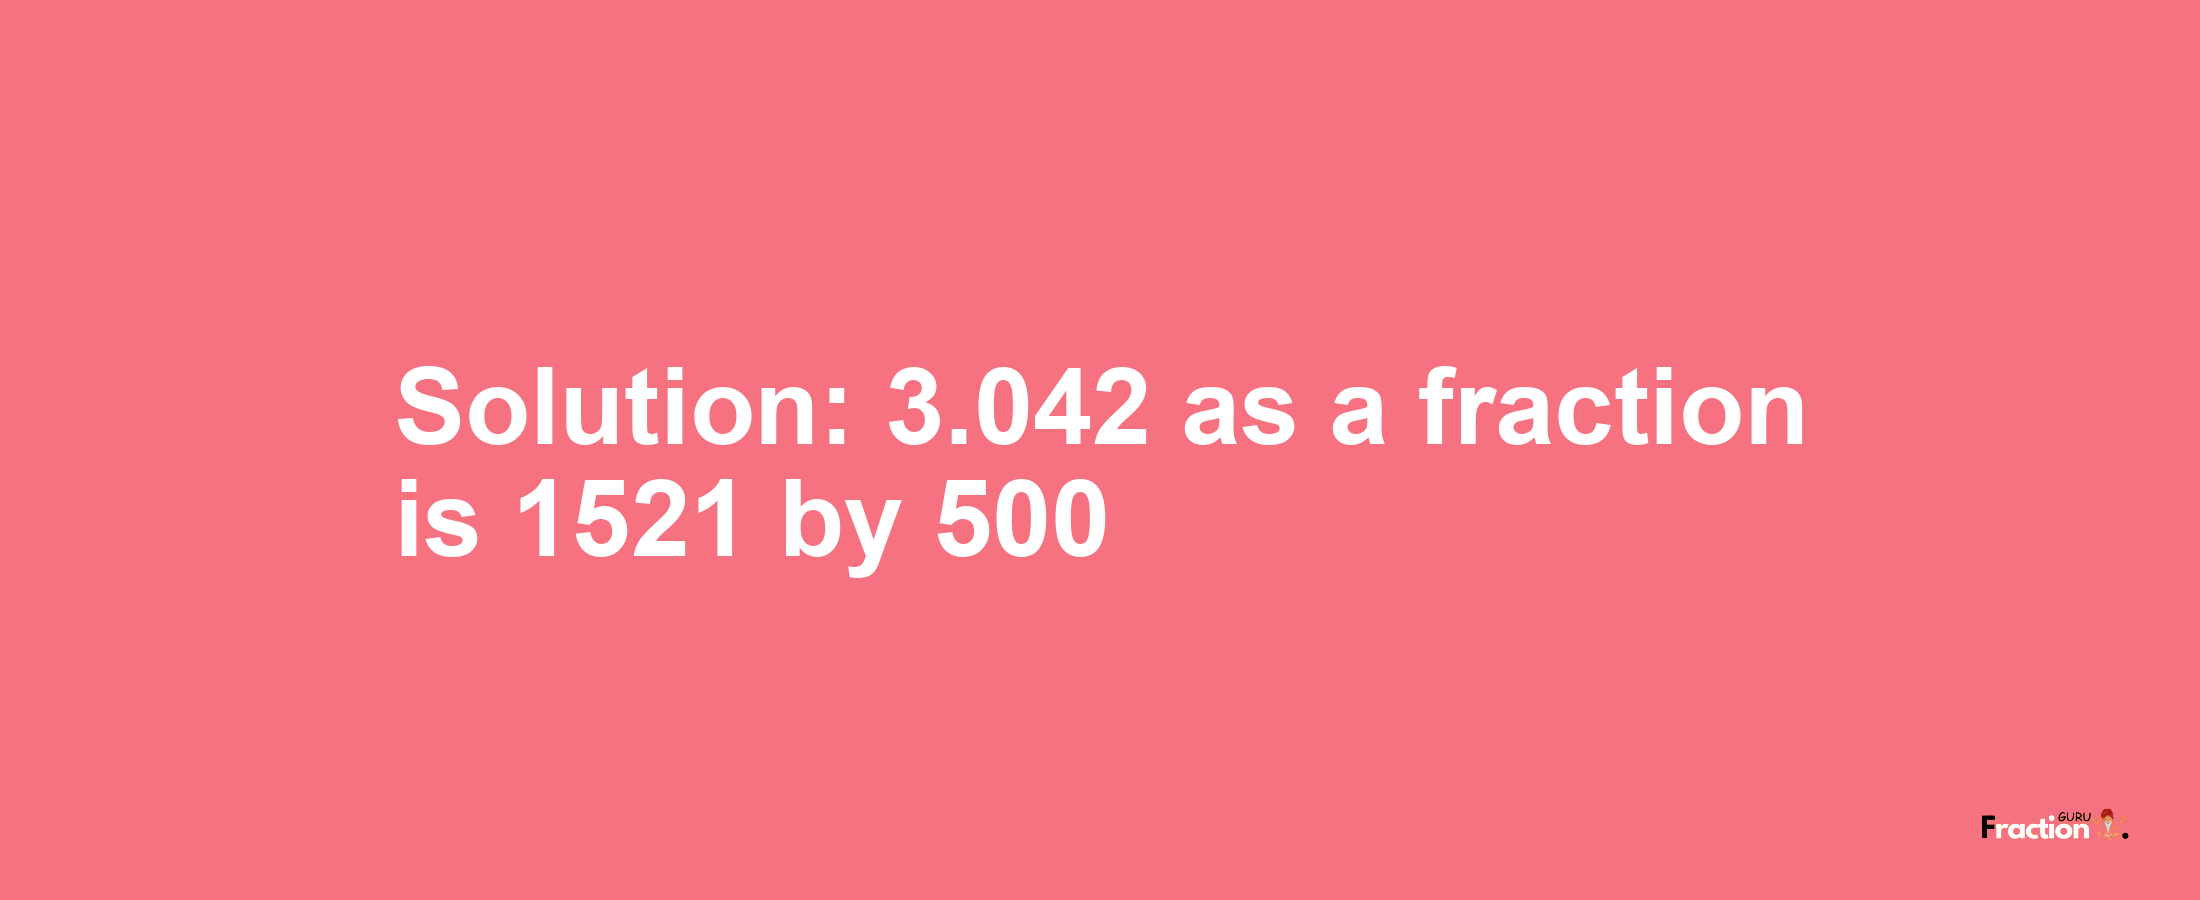 Solution:3.042 as a fraction is 1521/500